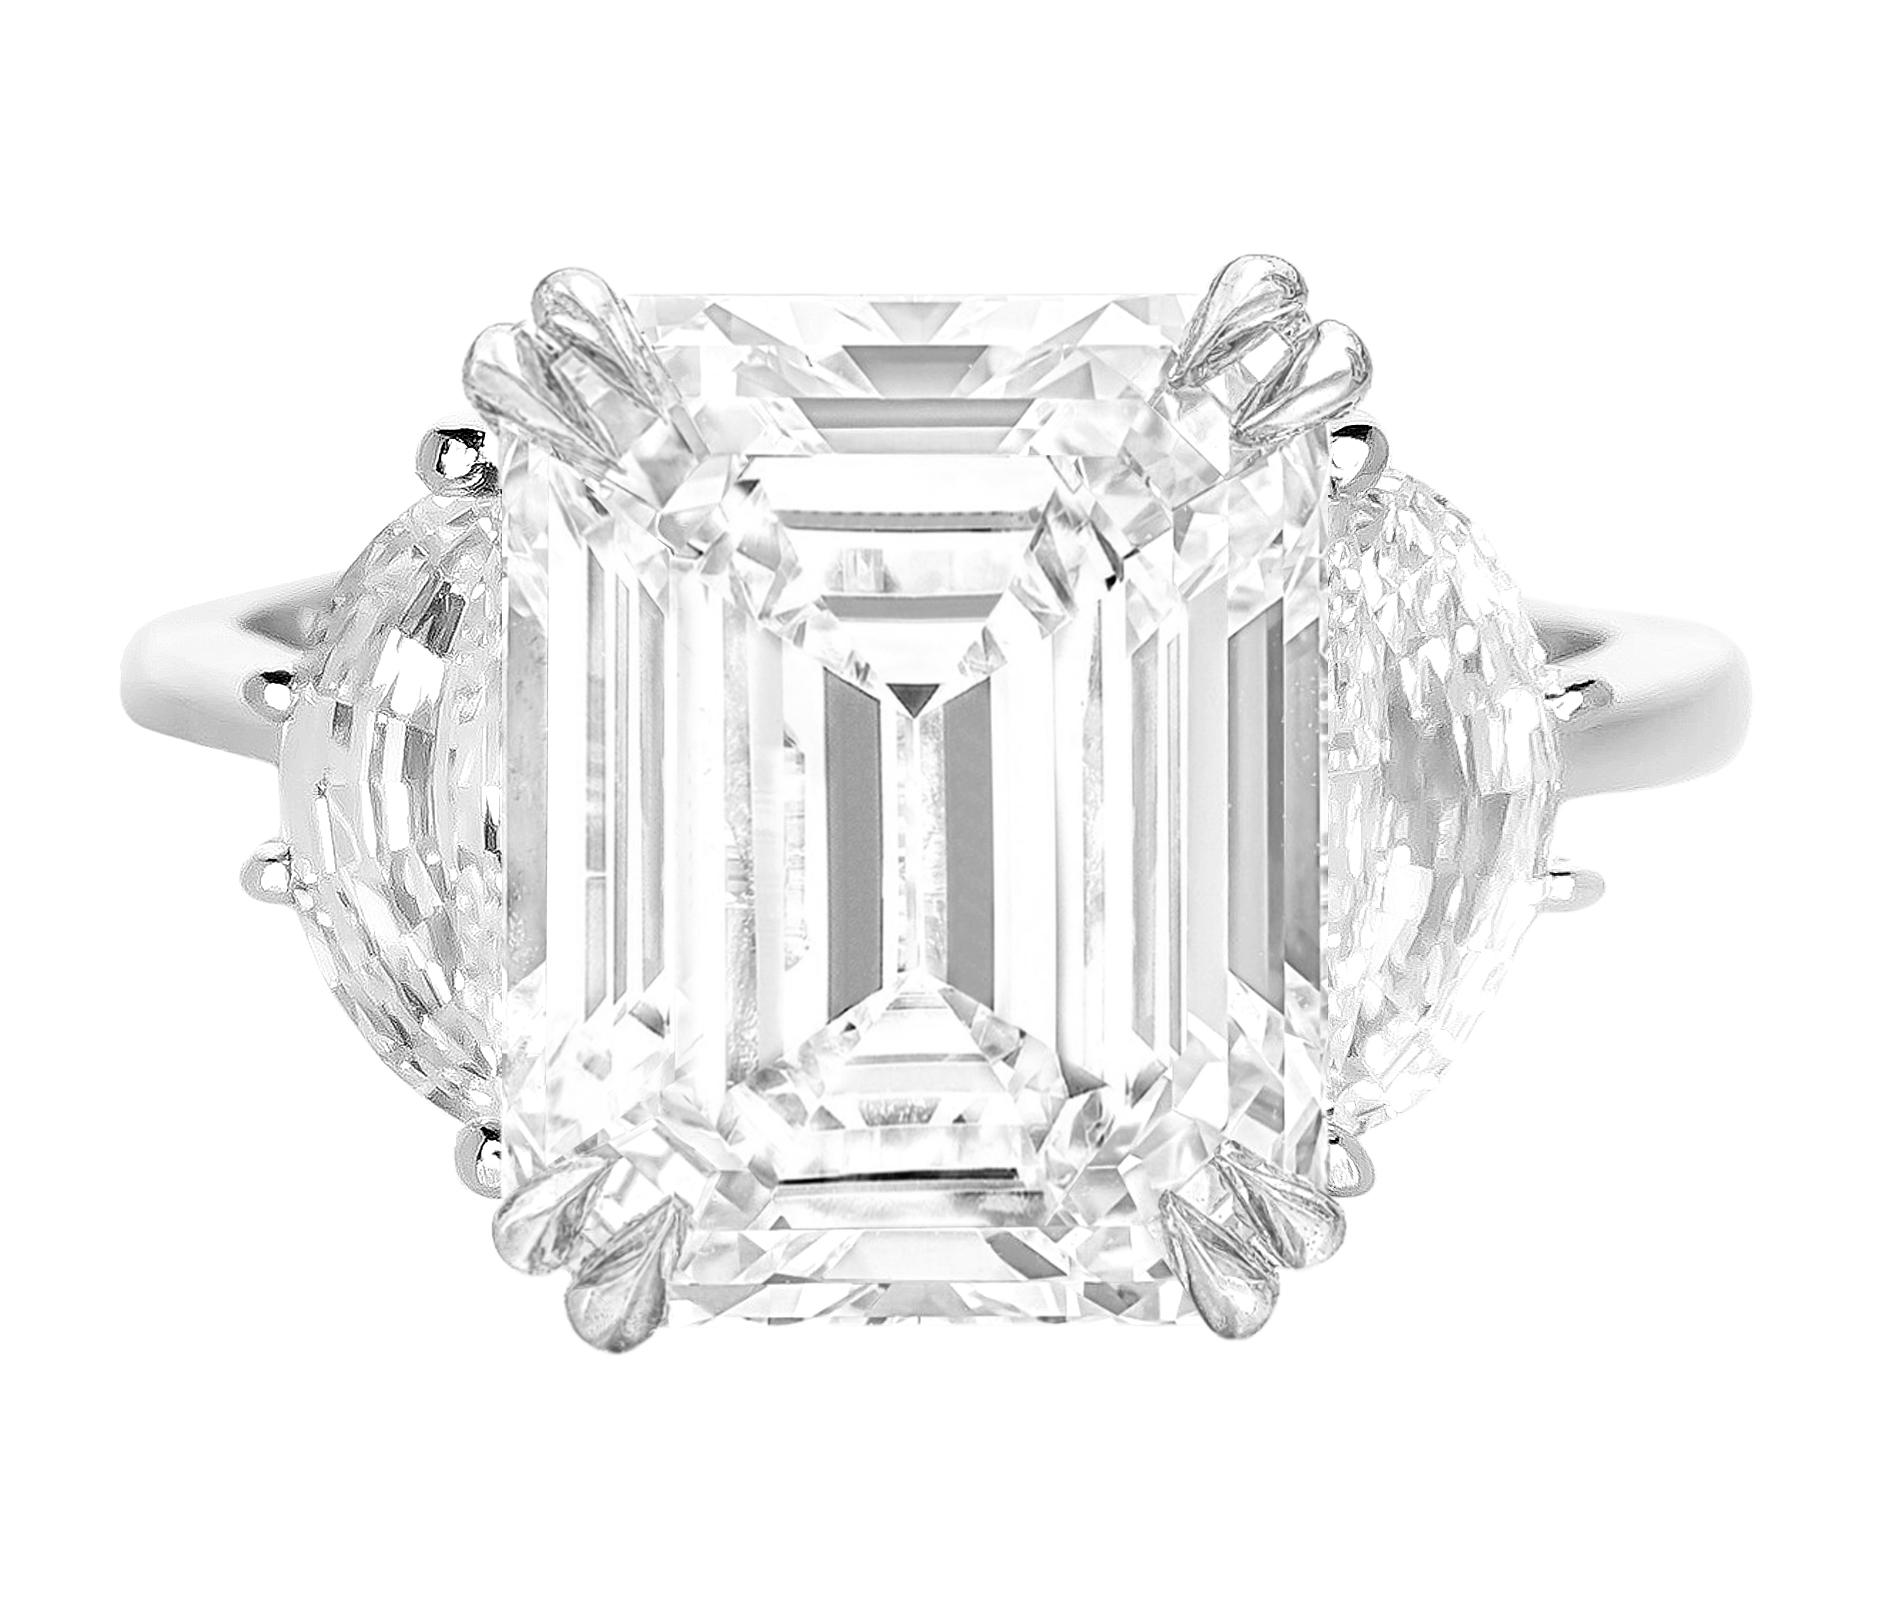 Imagine a GIA certified 10 ct emerald cut diamond, boasting an G color grade and VVS2 clarity, set upon an 18k white gold band. This centerpiece gem embodies elegance and brilliance, characterized by the emerald cut's elongated silhouette and